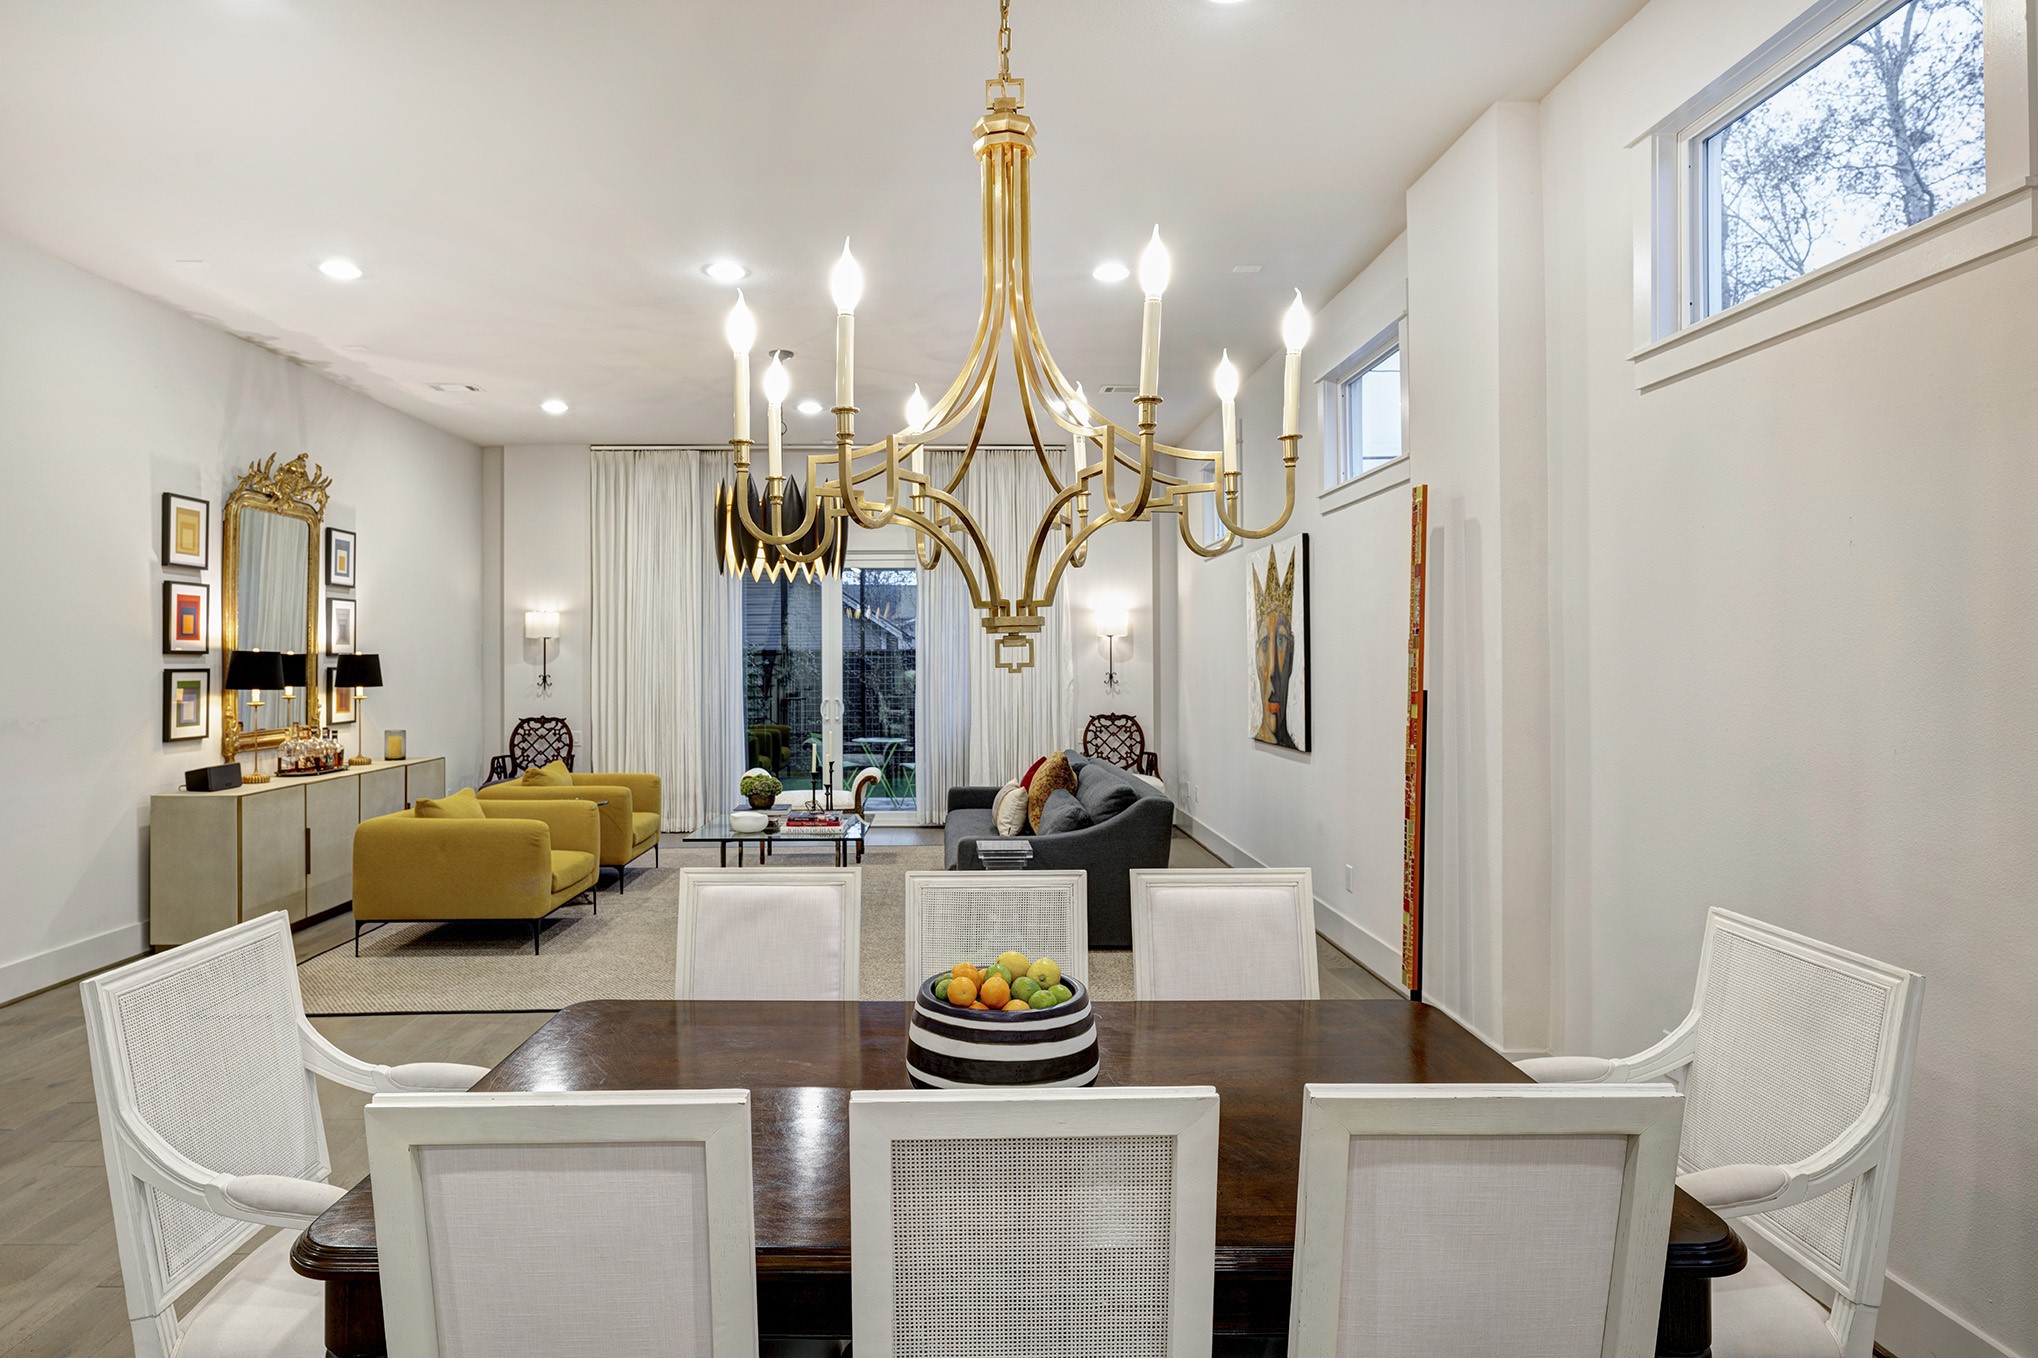 Centered between the kitchen and living room, the dining area is anchored by this striking Mykonos by E.F. Chapman chandelier.